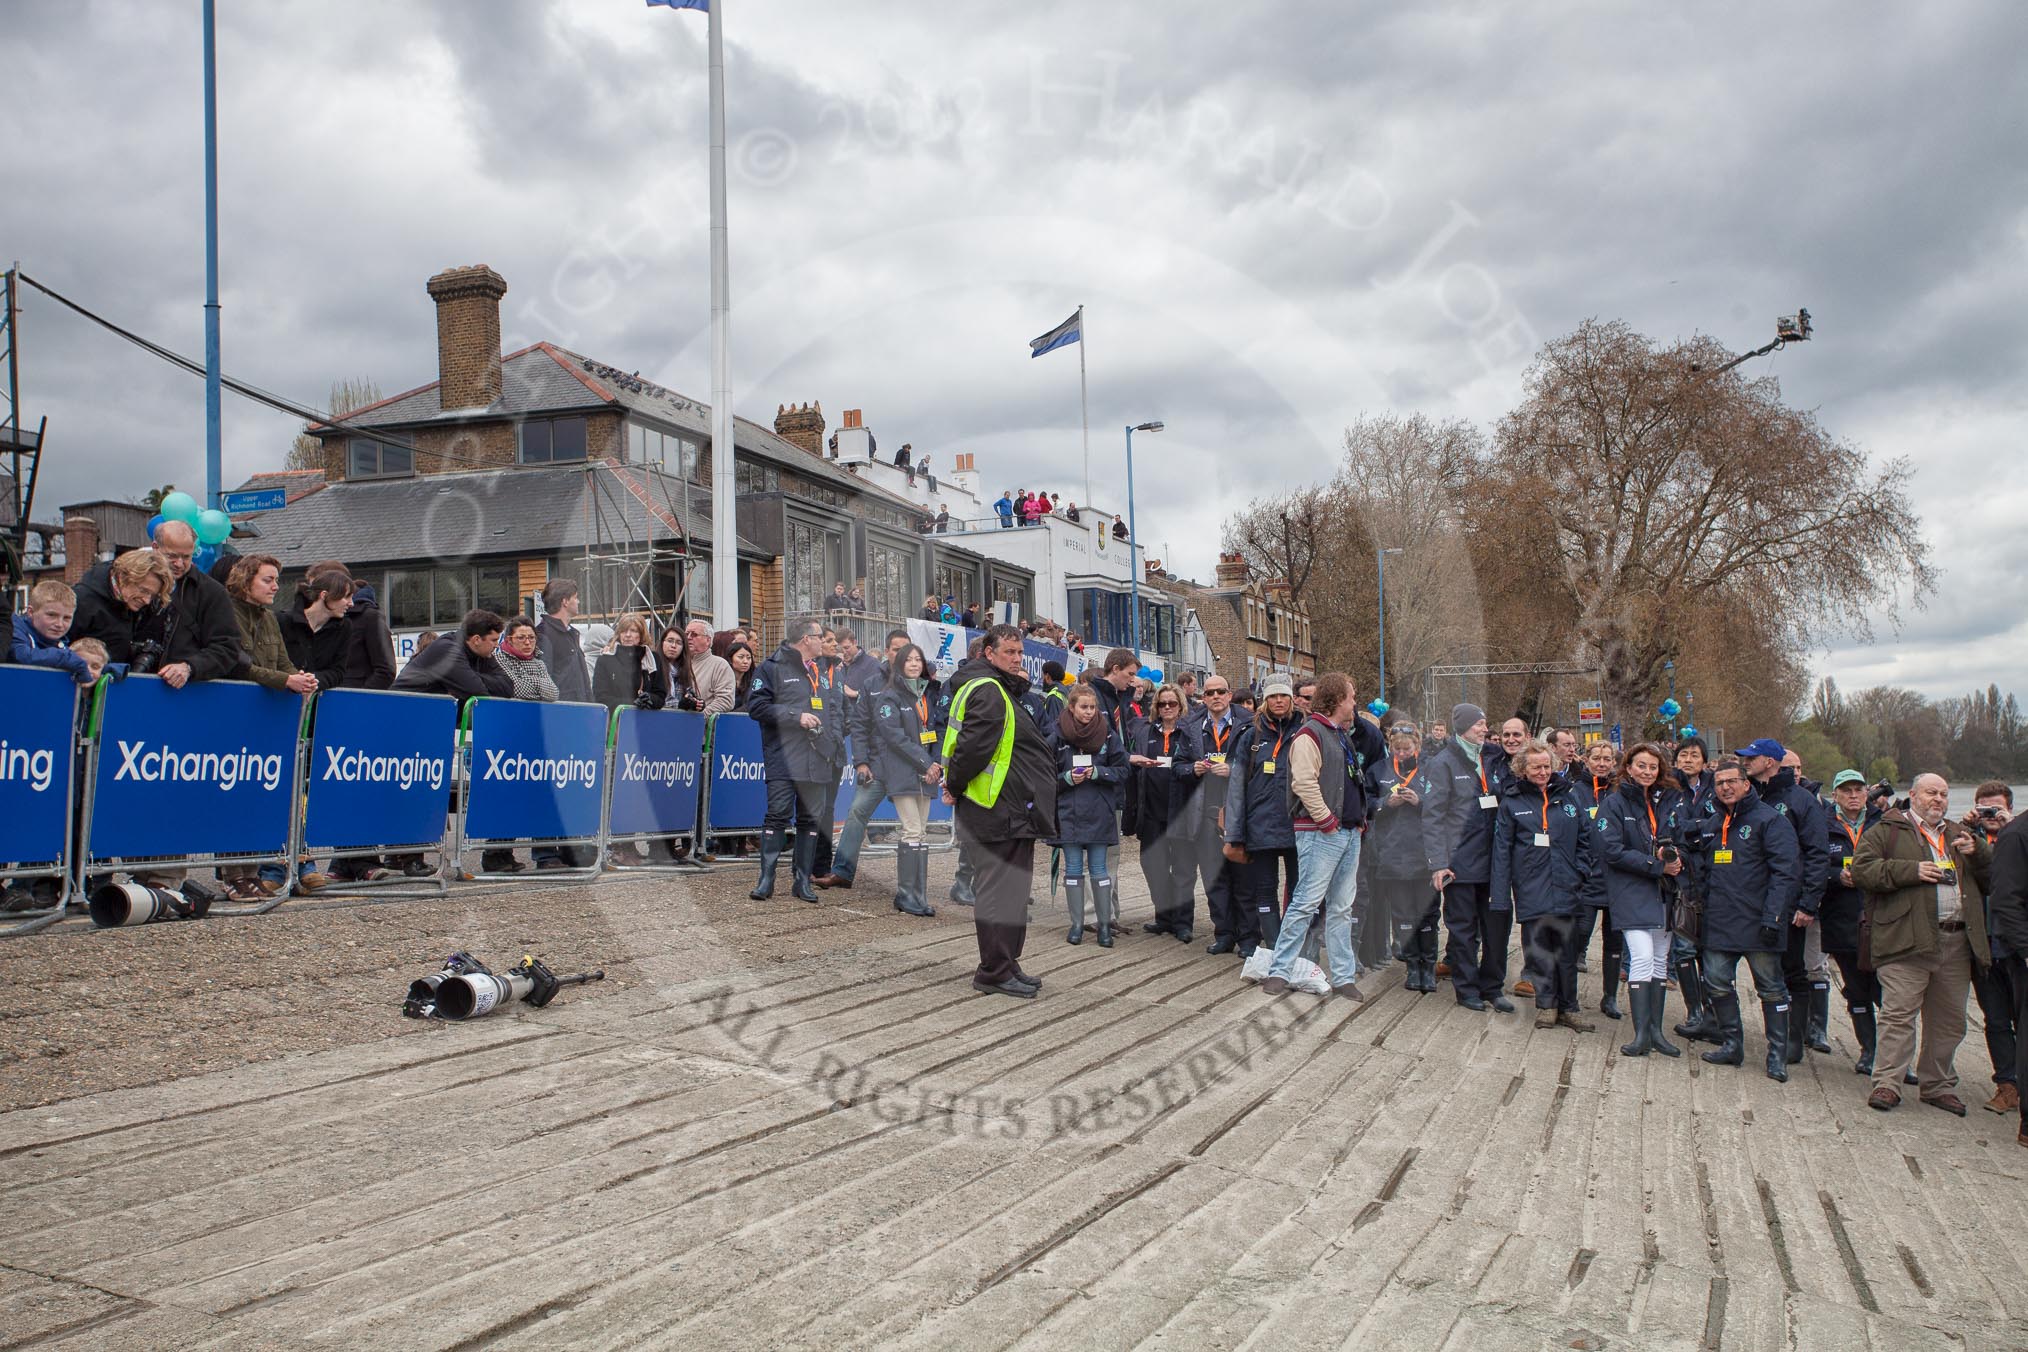 The Boat Race 2012: Members of the media and officials waiting to board the boats that will follow the Boat Race. On the left the BT Press Centre in the Thames Rowing Club boathouse..




on 07 April 2012 at 13:24, image #126